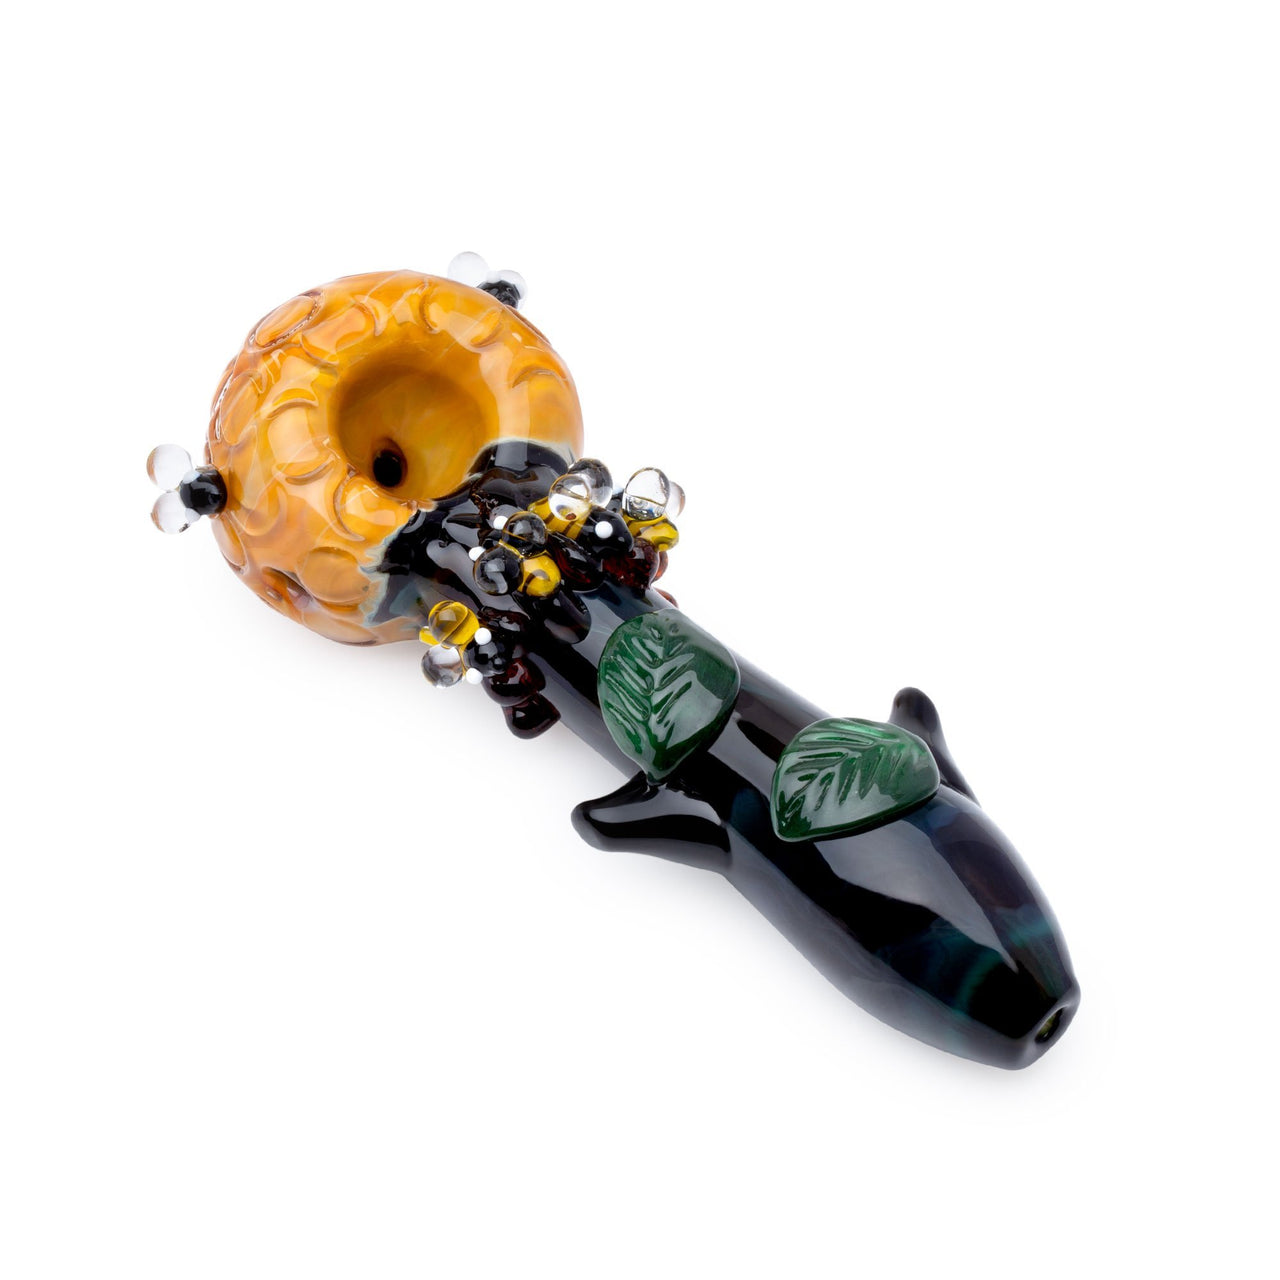 Higher Standards Heavy Duty Spoon Pipe / $ 59.99 at 420 Science